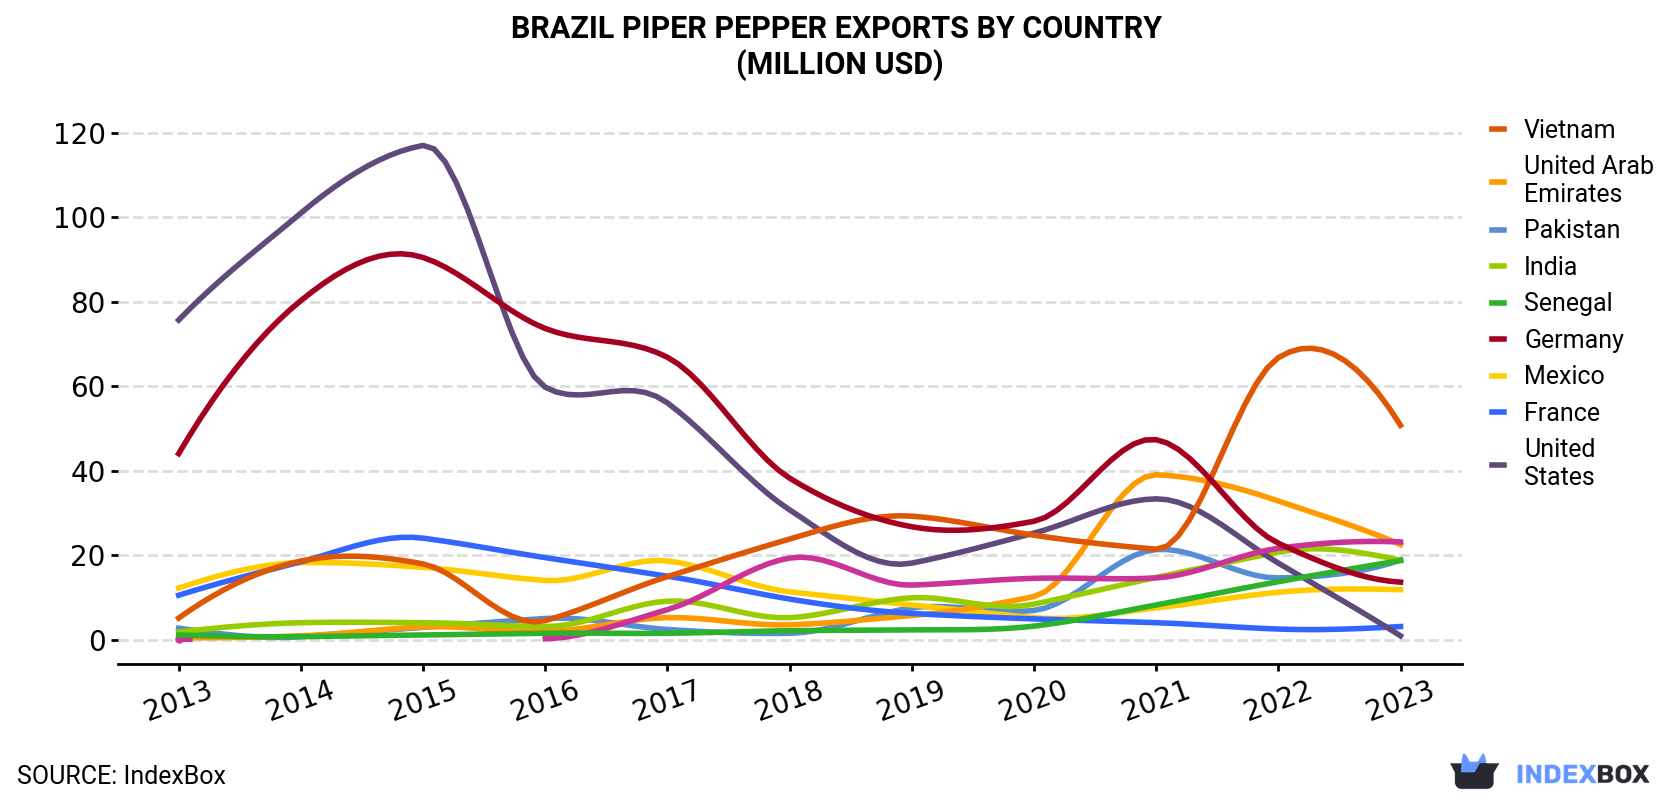 Brazil Piper Pepper Exports By Country (Million USD)